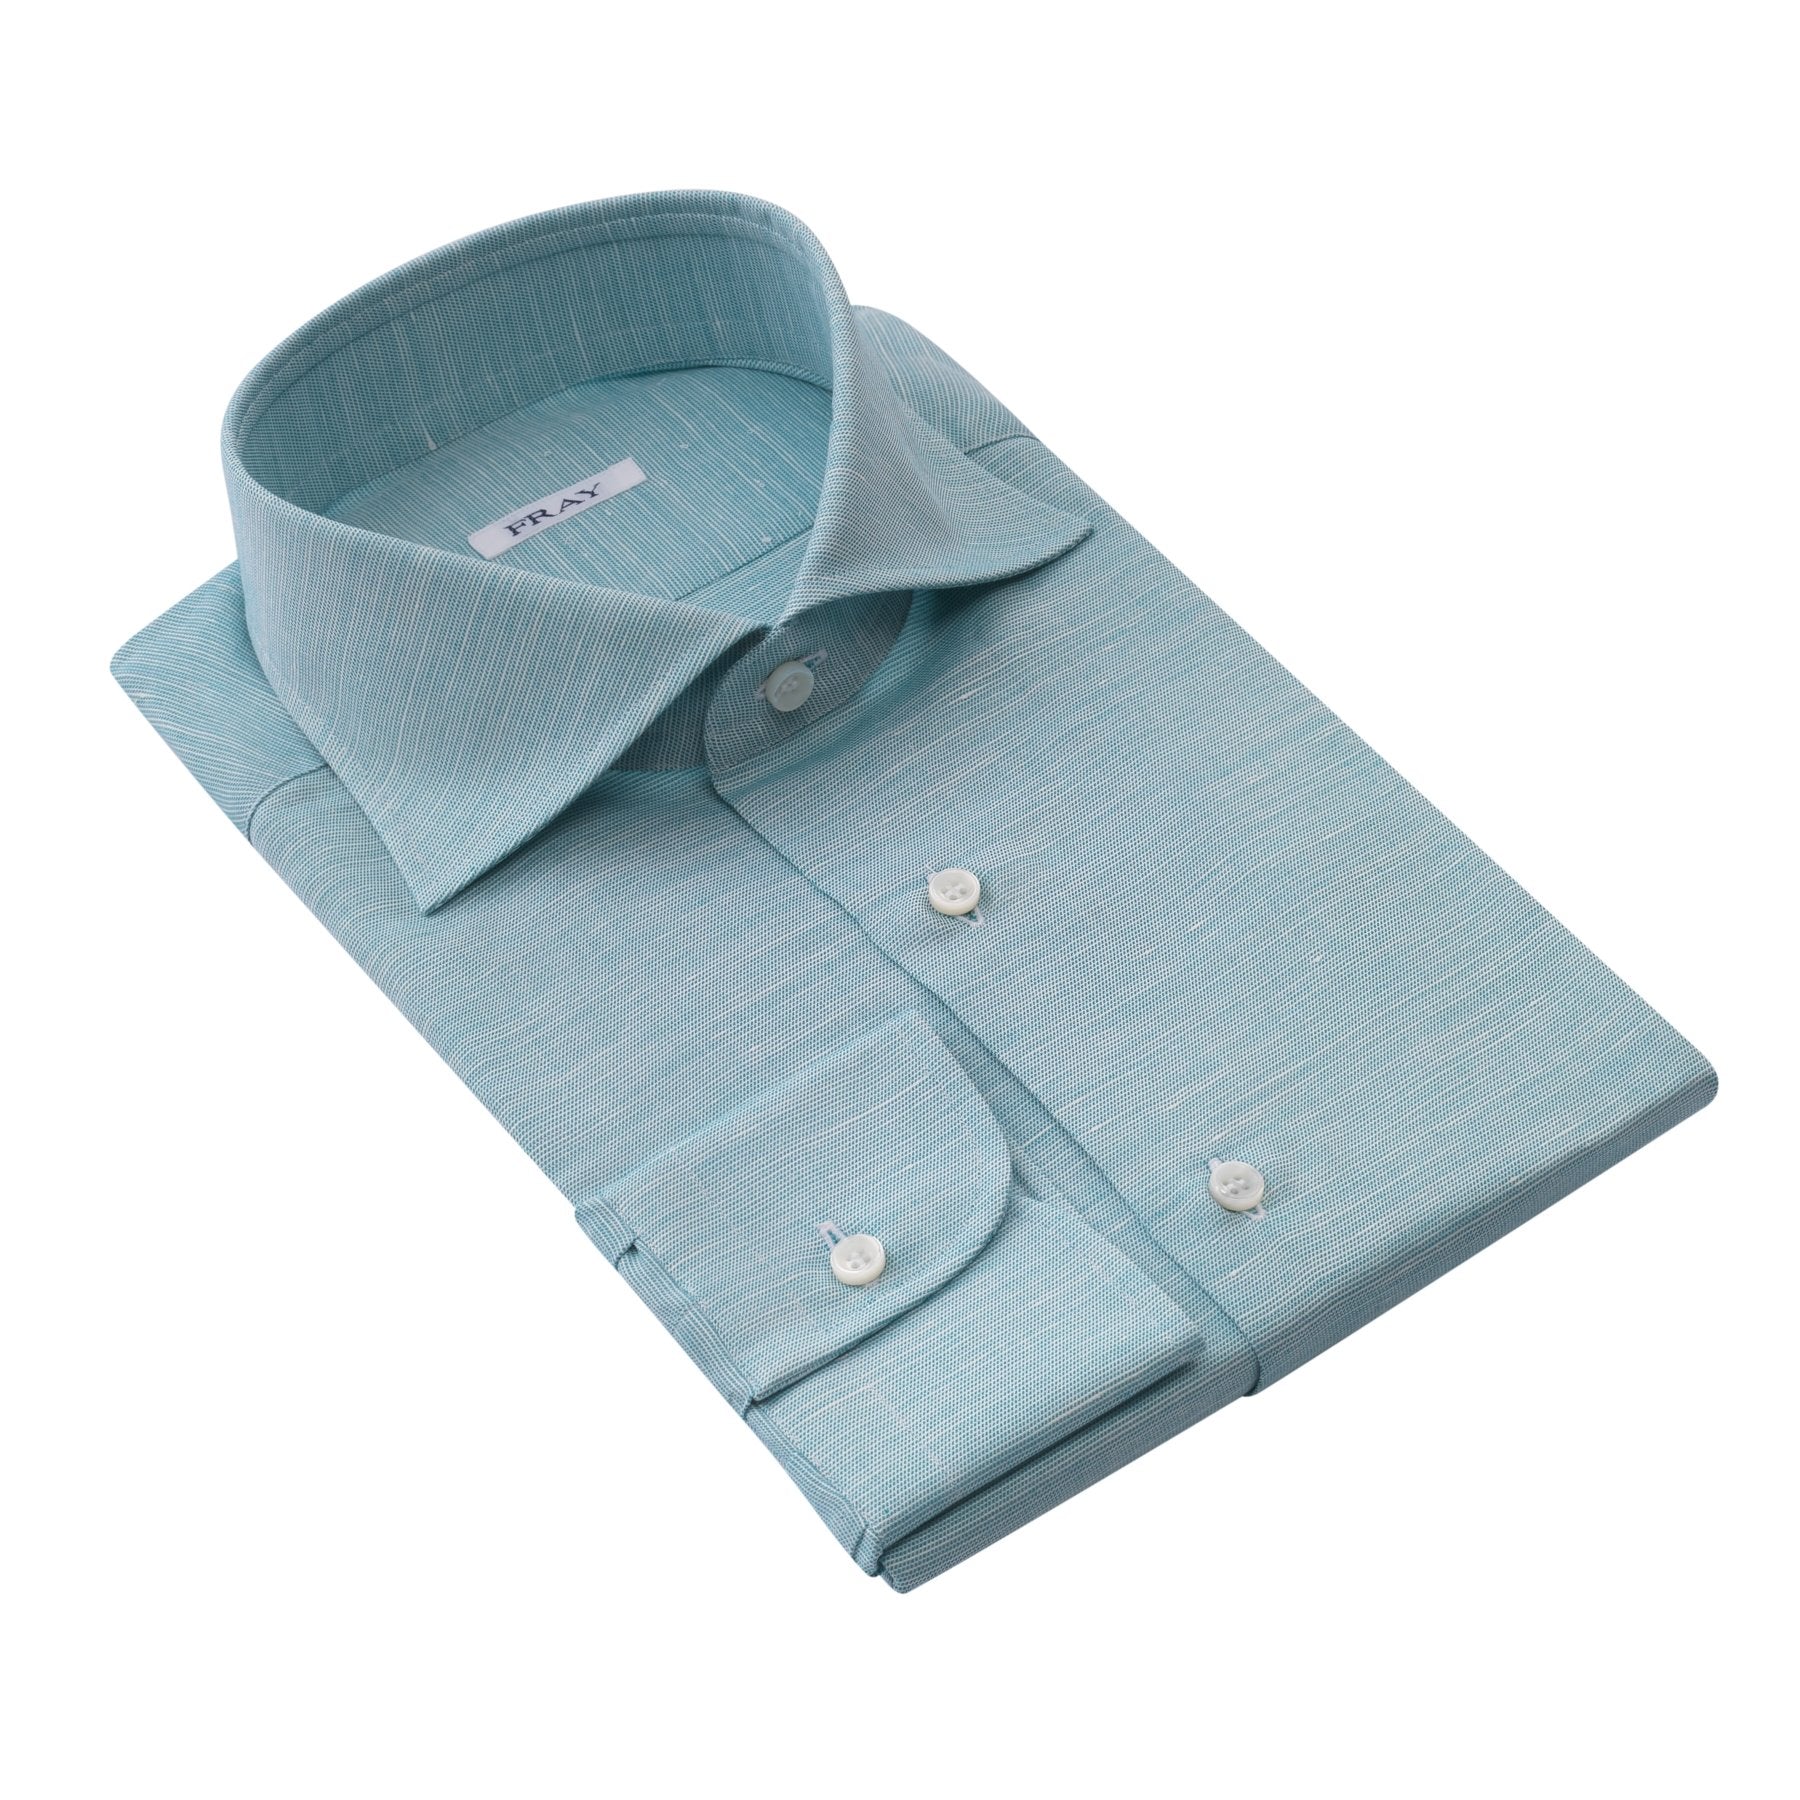 Cotton and Hemp-Blend Ocean Blue Shirt with Round French Cuff